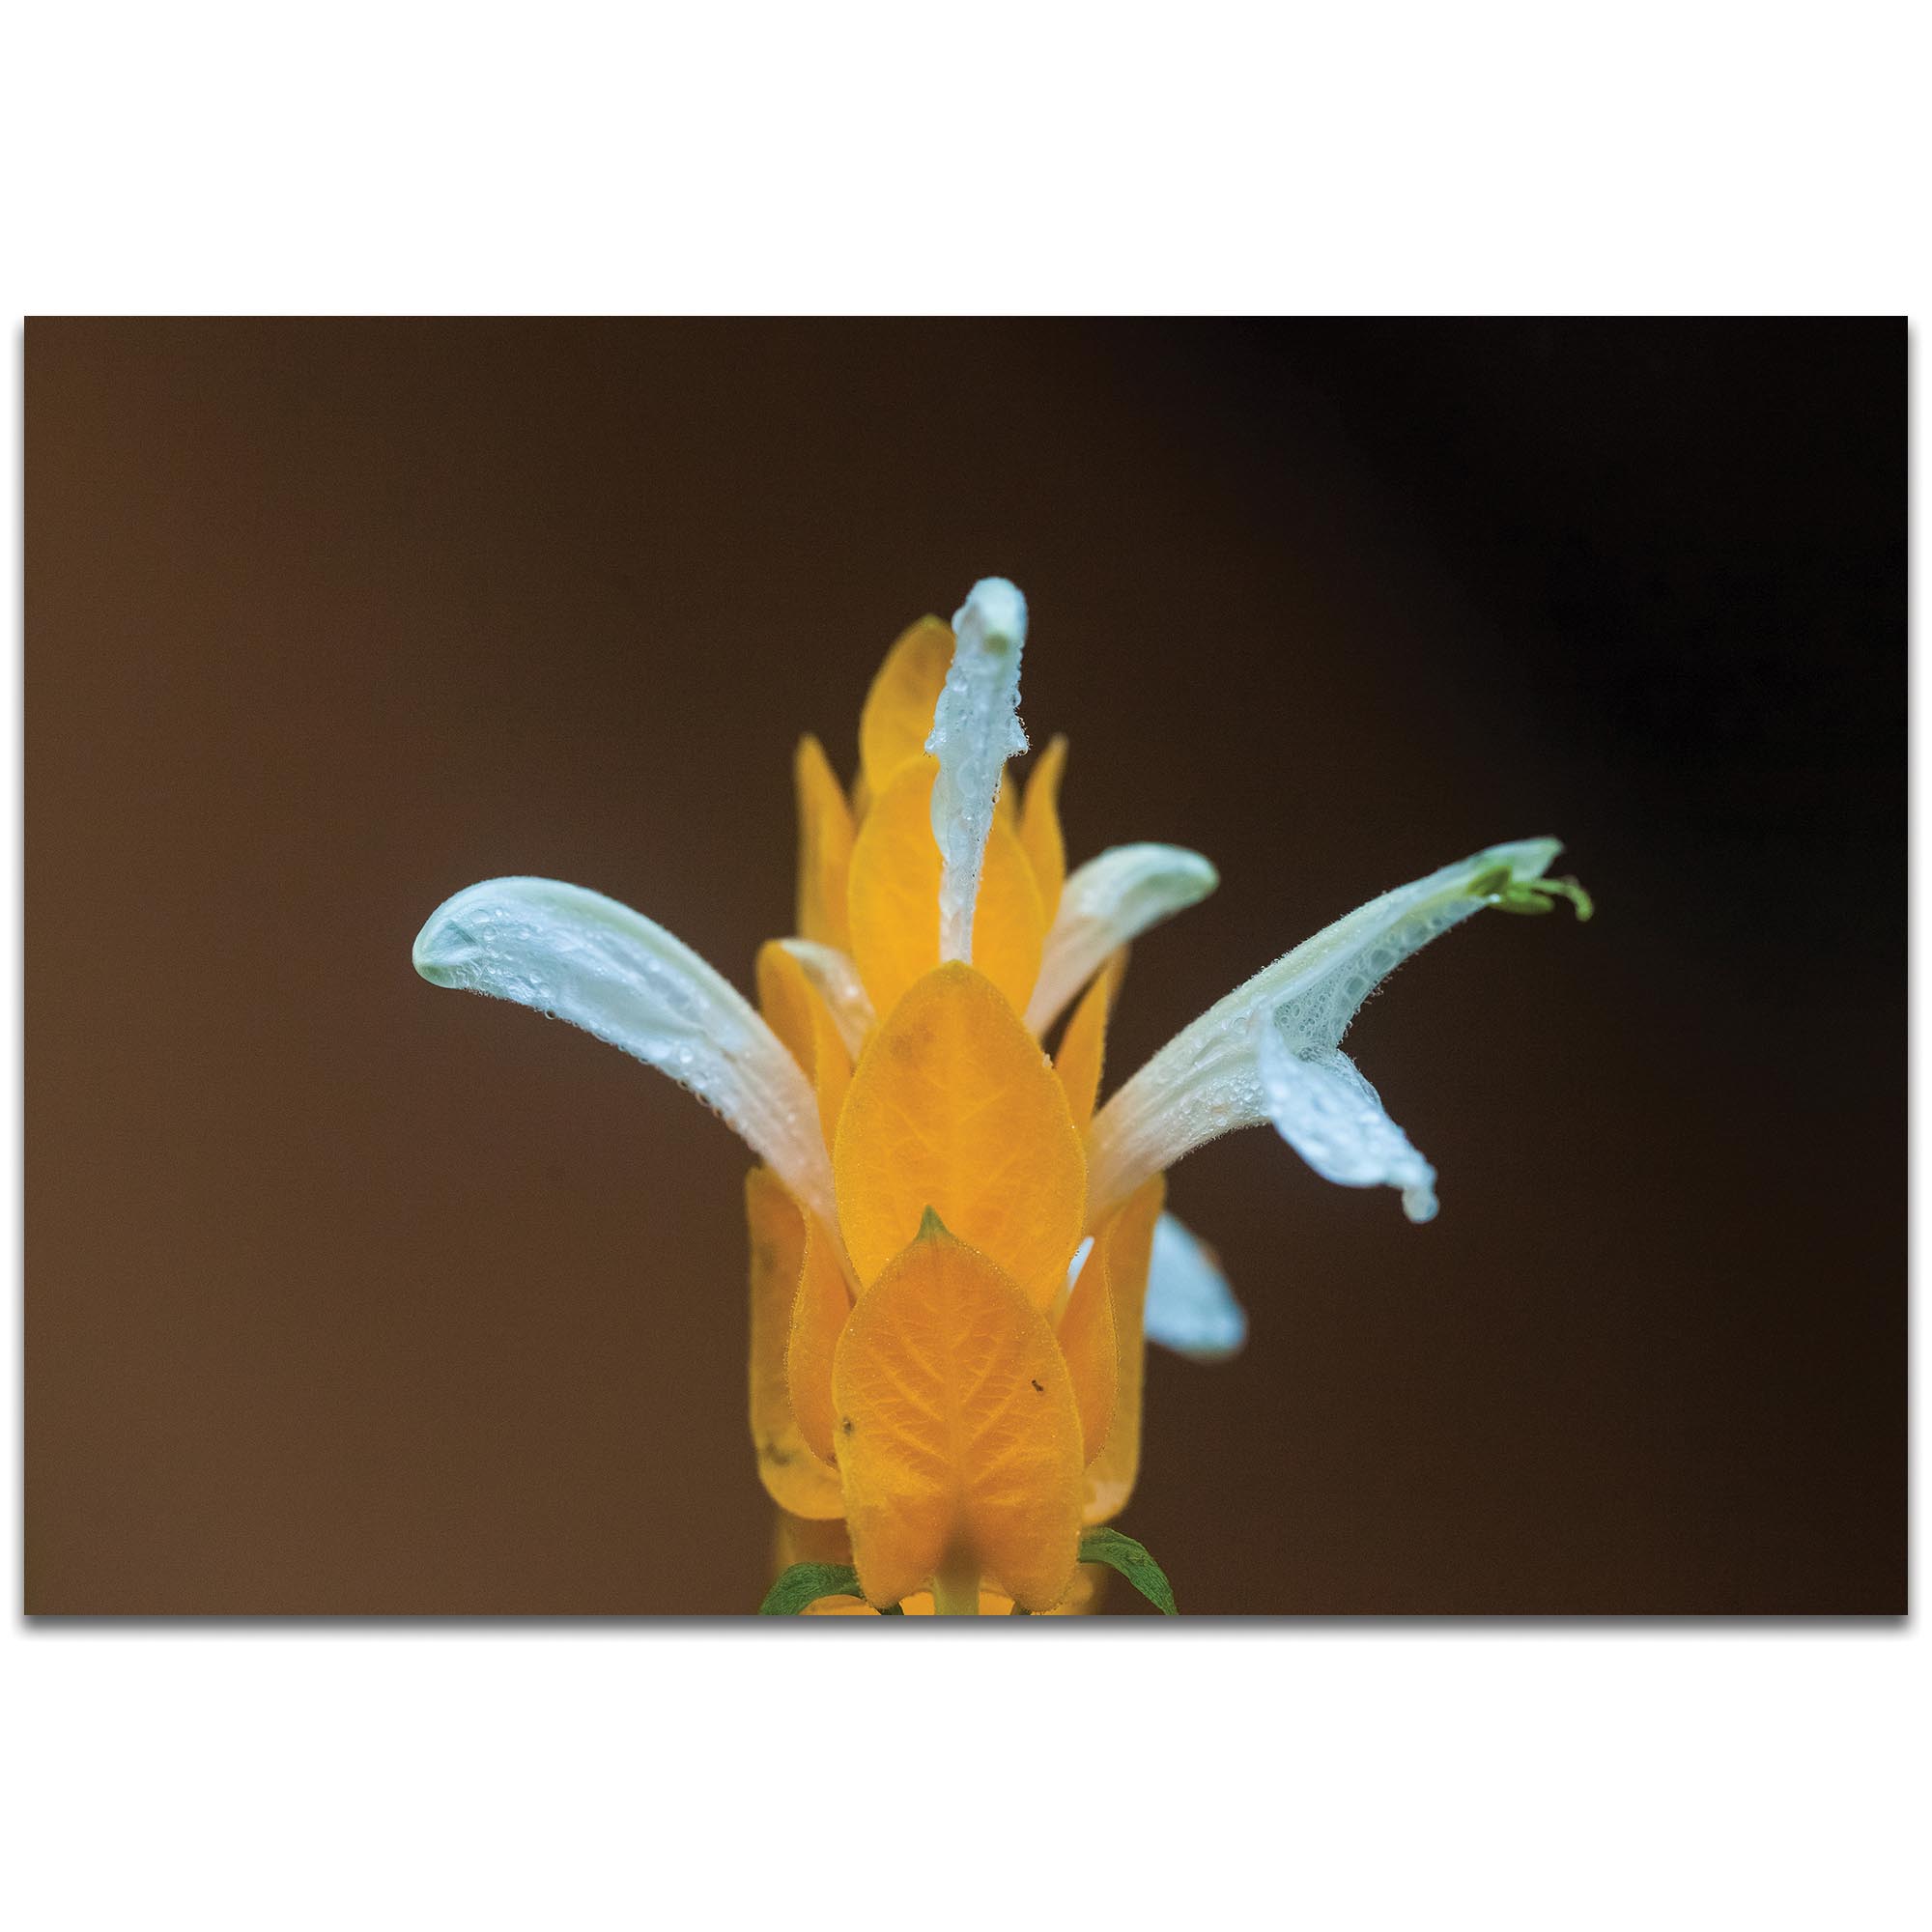 Nature Photography 'White and Gold' - Flower Blossom Art on Metal or Plexiglass